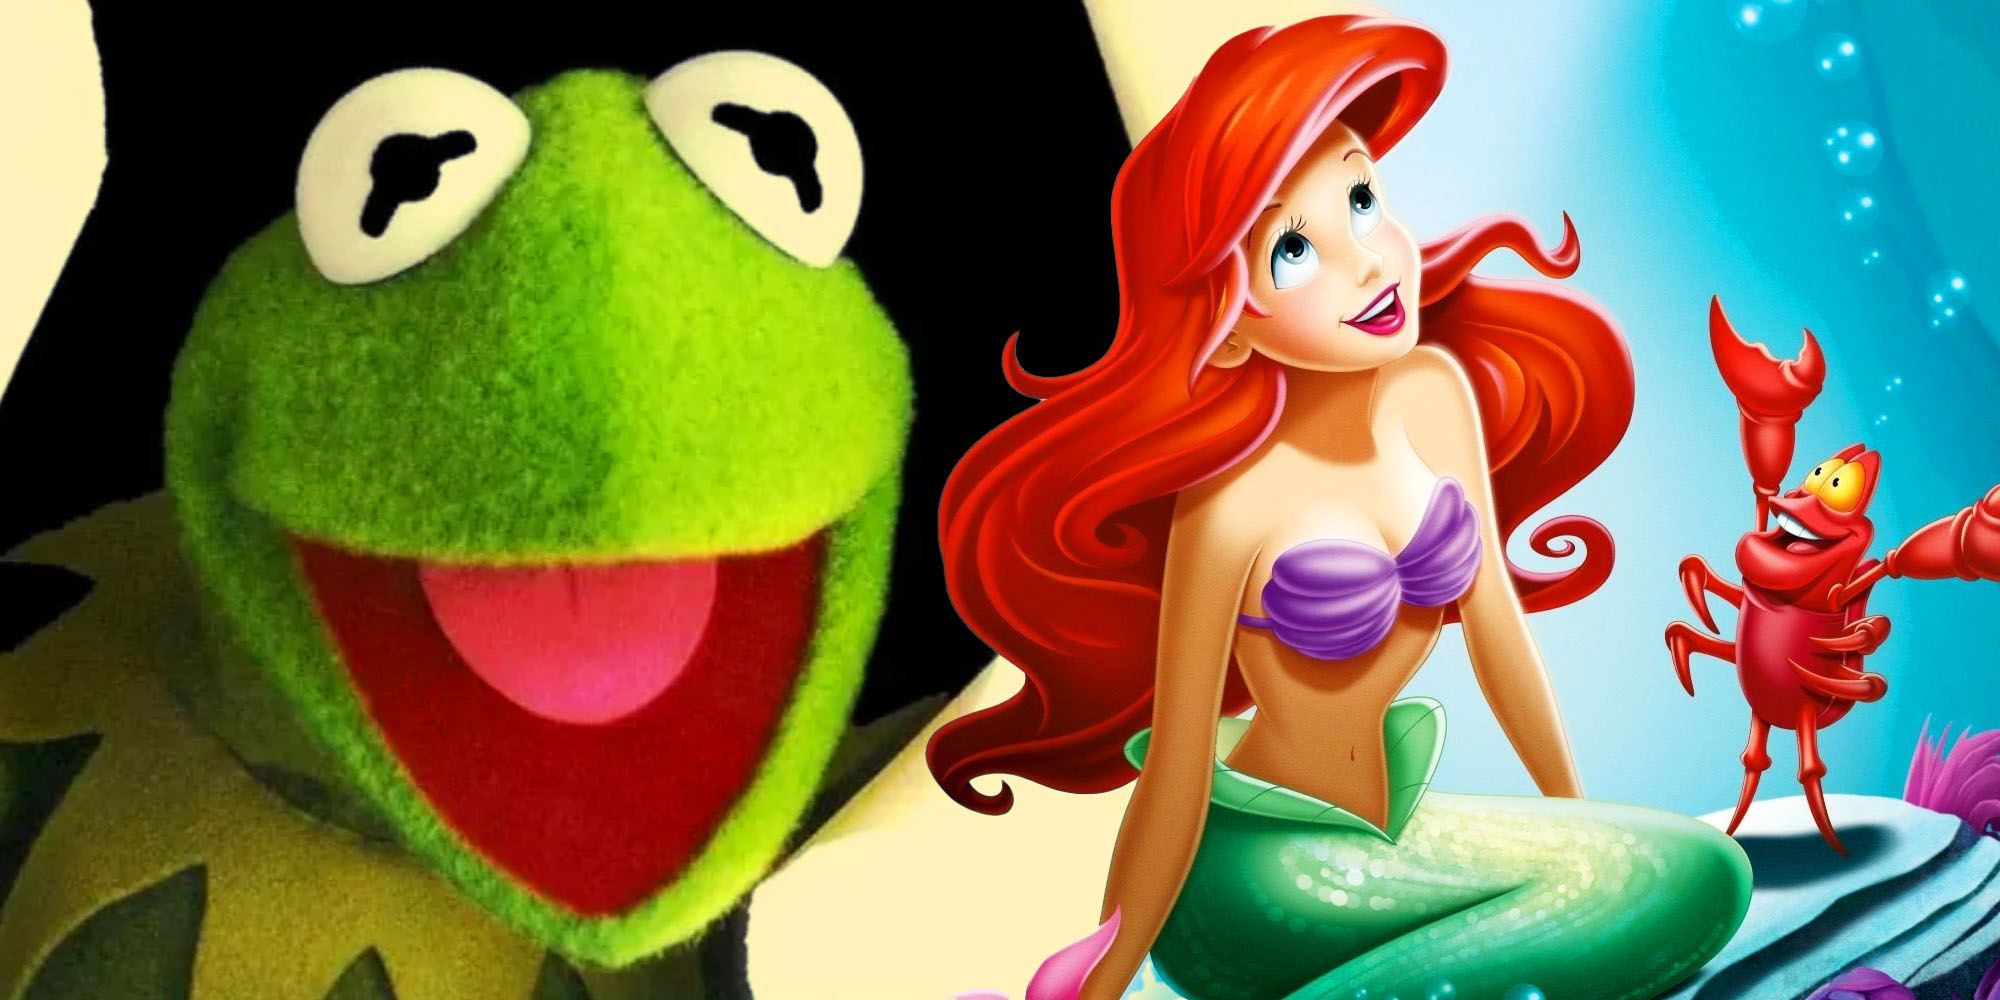 Where To Find The Little Mermaid Animated Movie’s Kermit The Frog Cameo